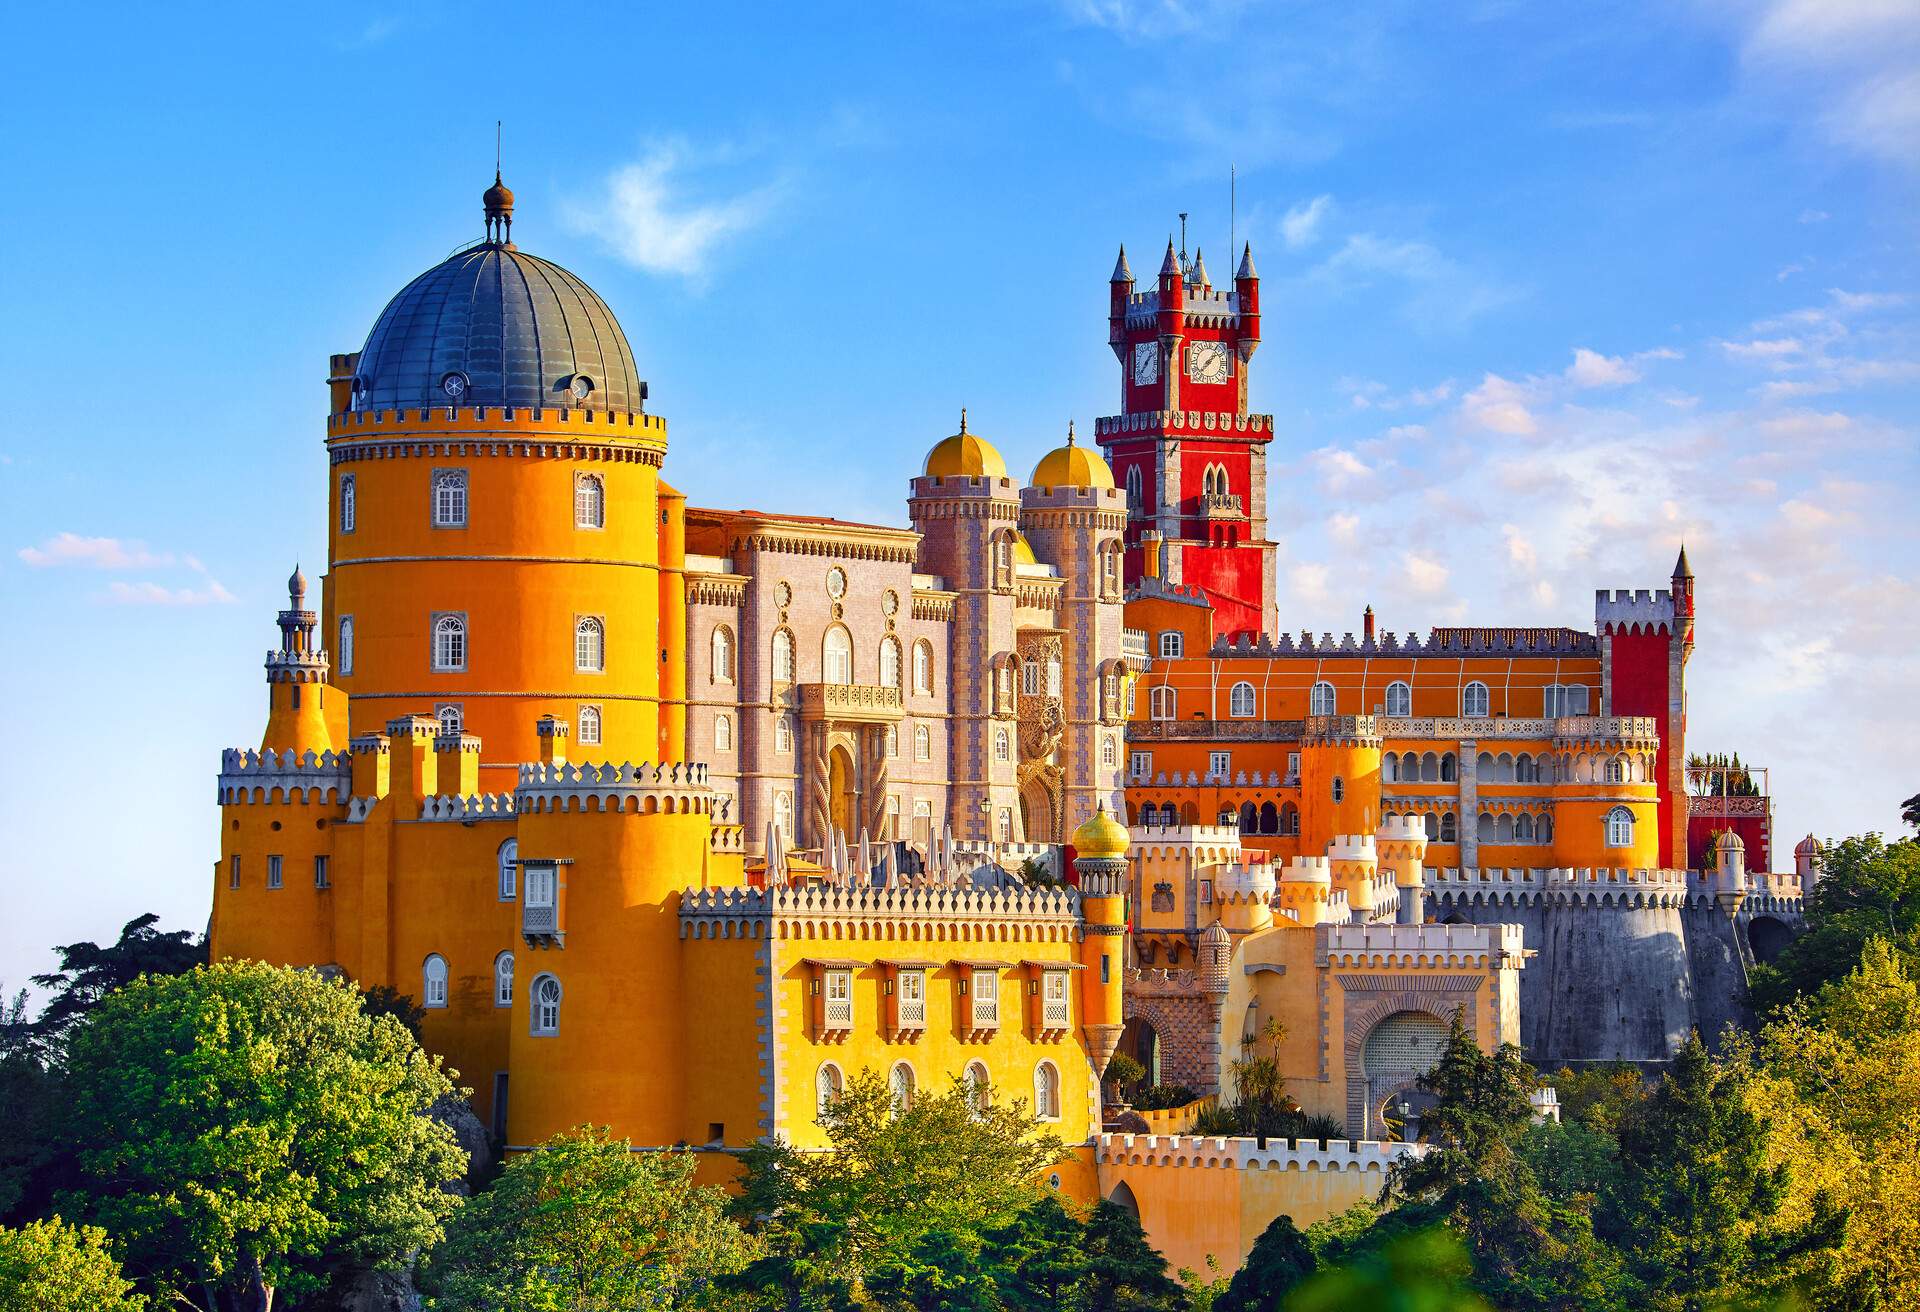 Pena Palace is a vibrant and colourful hilltop castle in yellow and red hues with domed towers surrounded by crenellated structures and a clock tower with turrets.